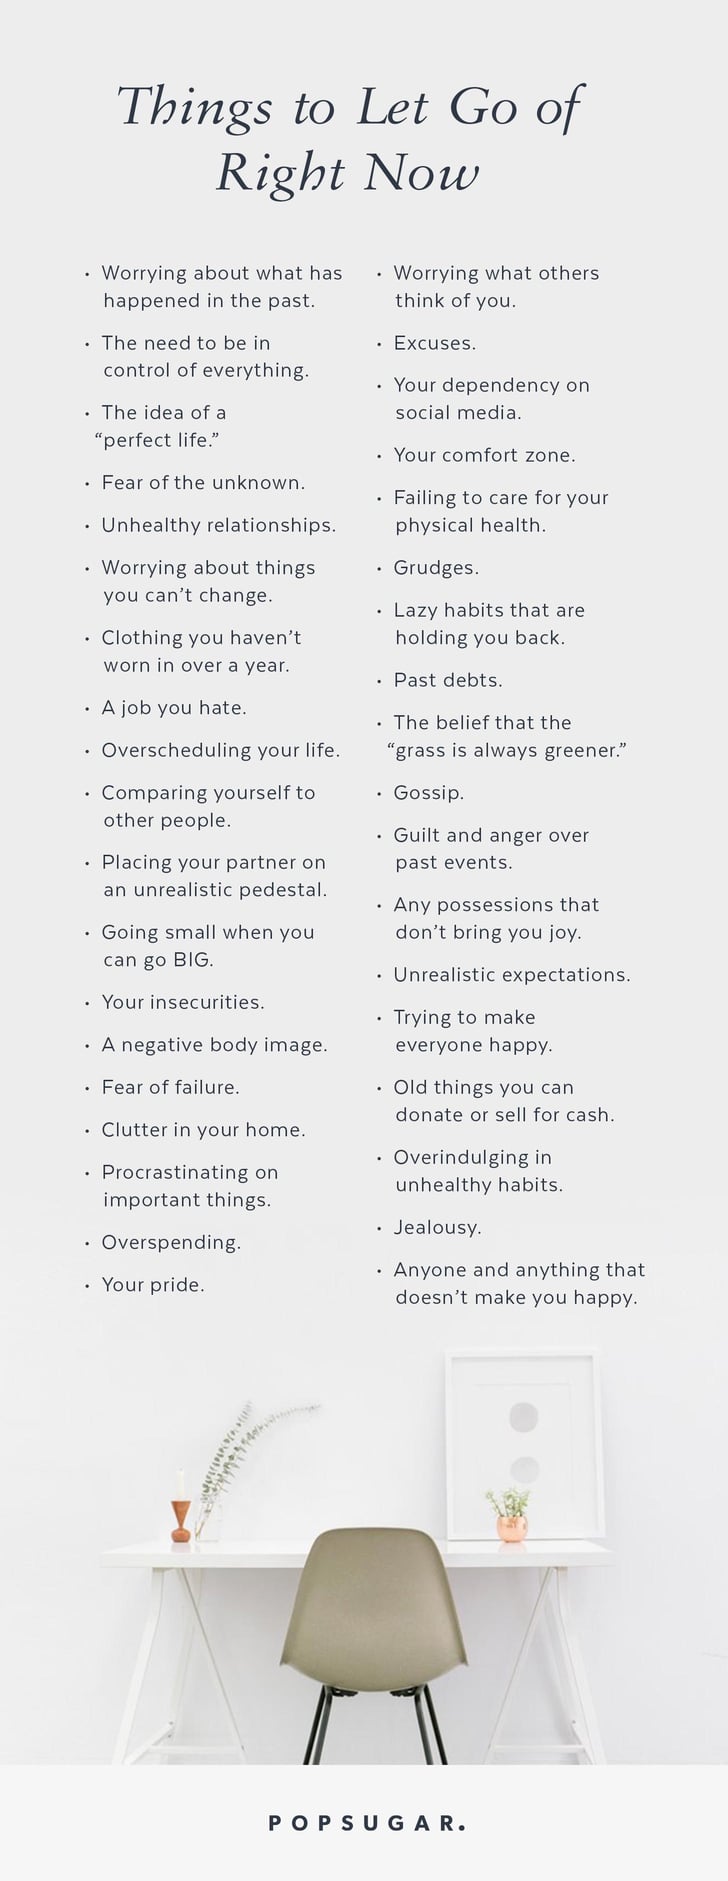 Things to Let Go Of